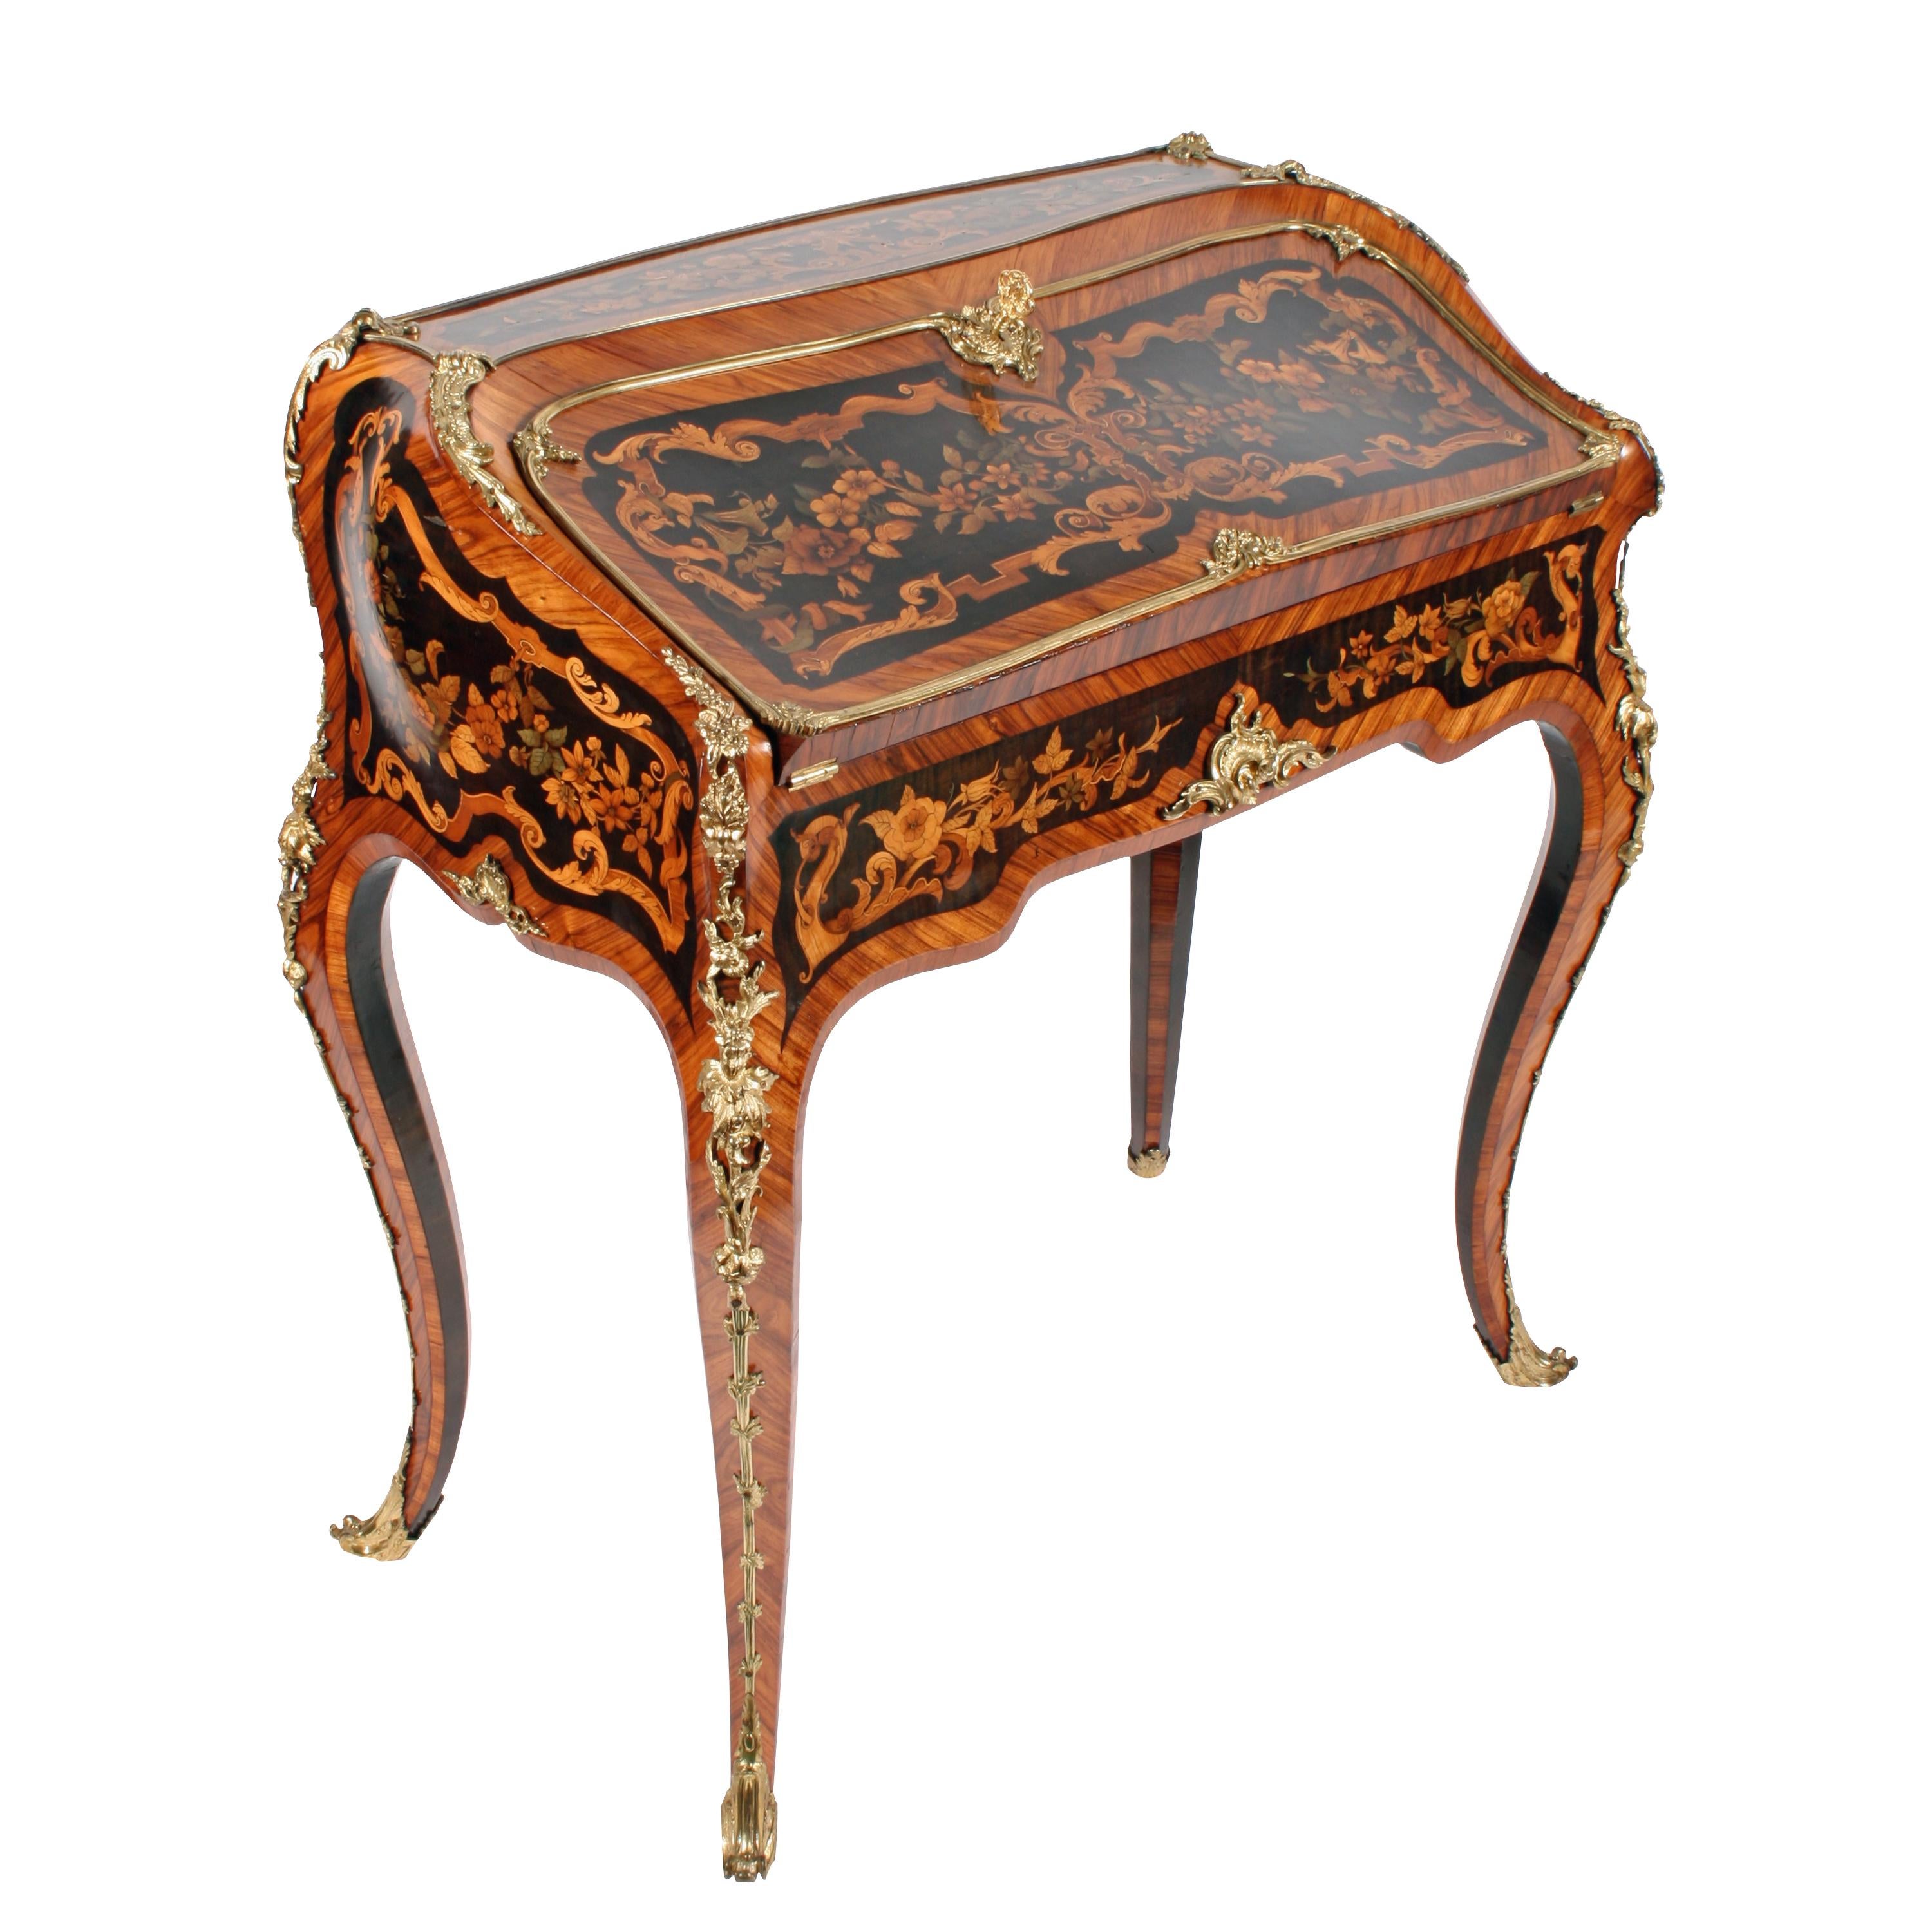 Louis XV style marquetry bureau en pente


A kingwood, tulipwood and sycamore floral marquetry bureau en pente.

The bureau is in the Louis XV style of Bernard Van Risenburgh and is attributed to George Blake & Co. for Edward Holmes